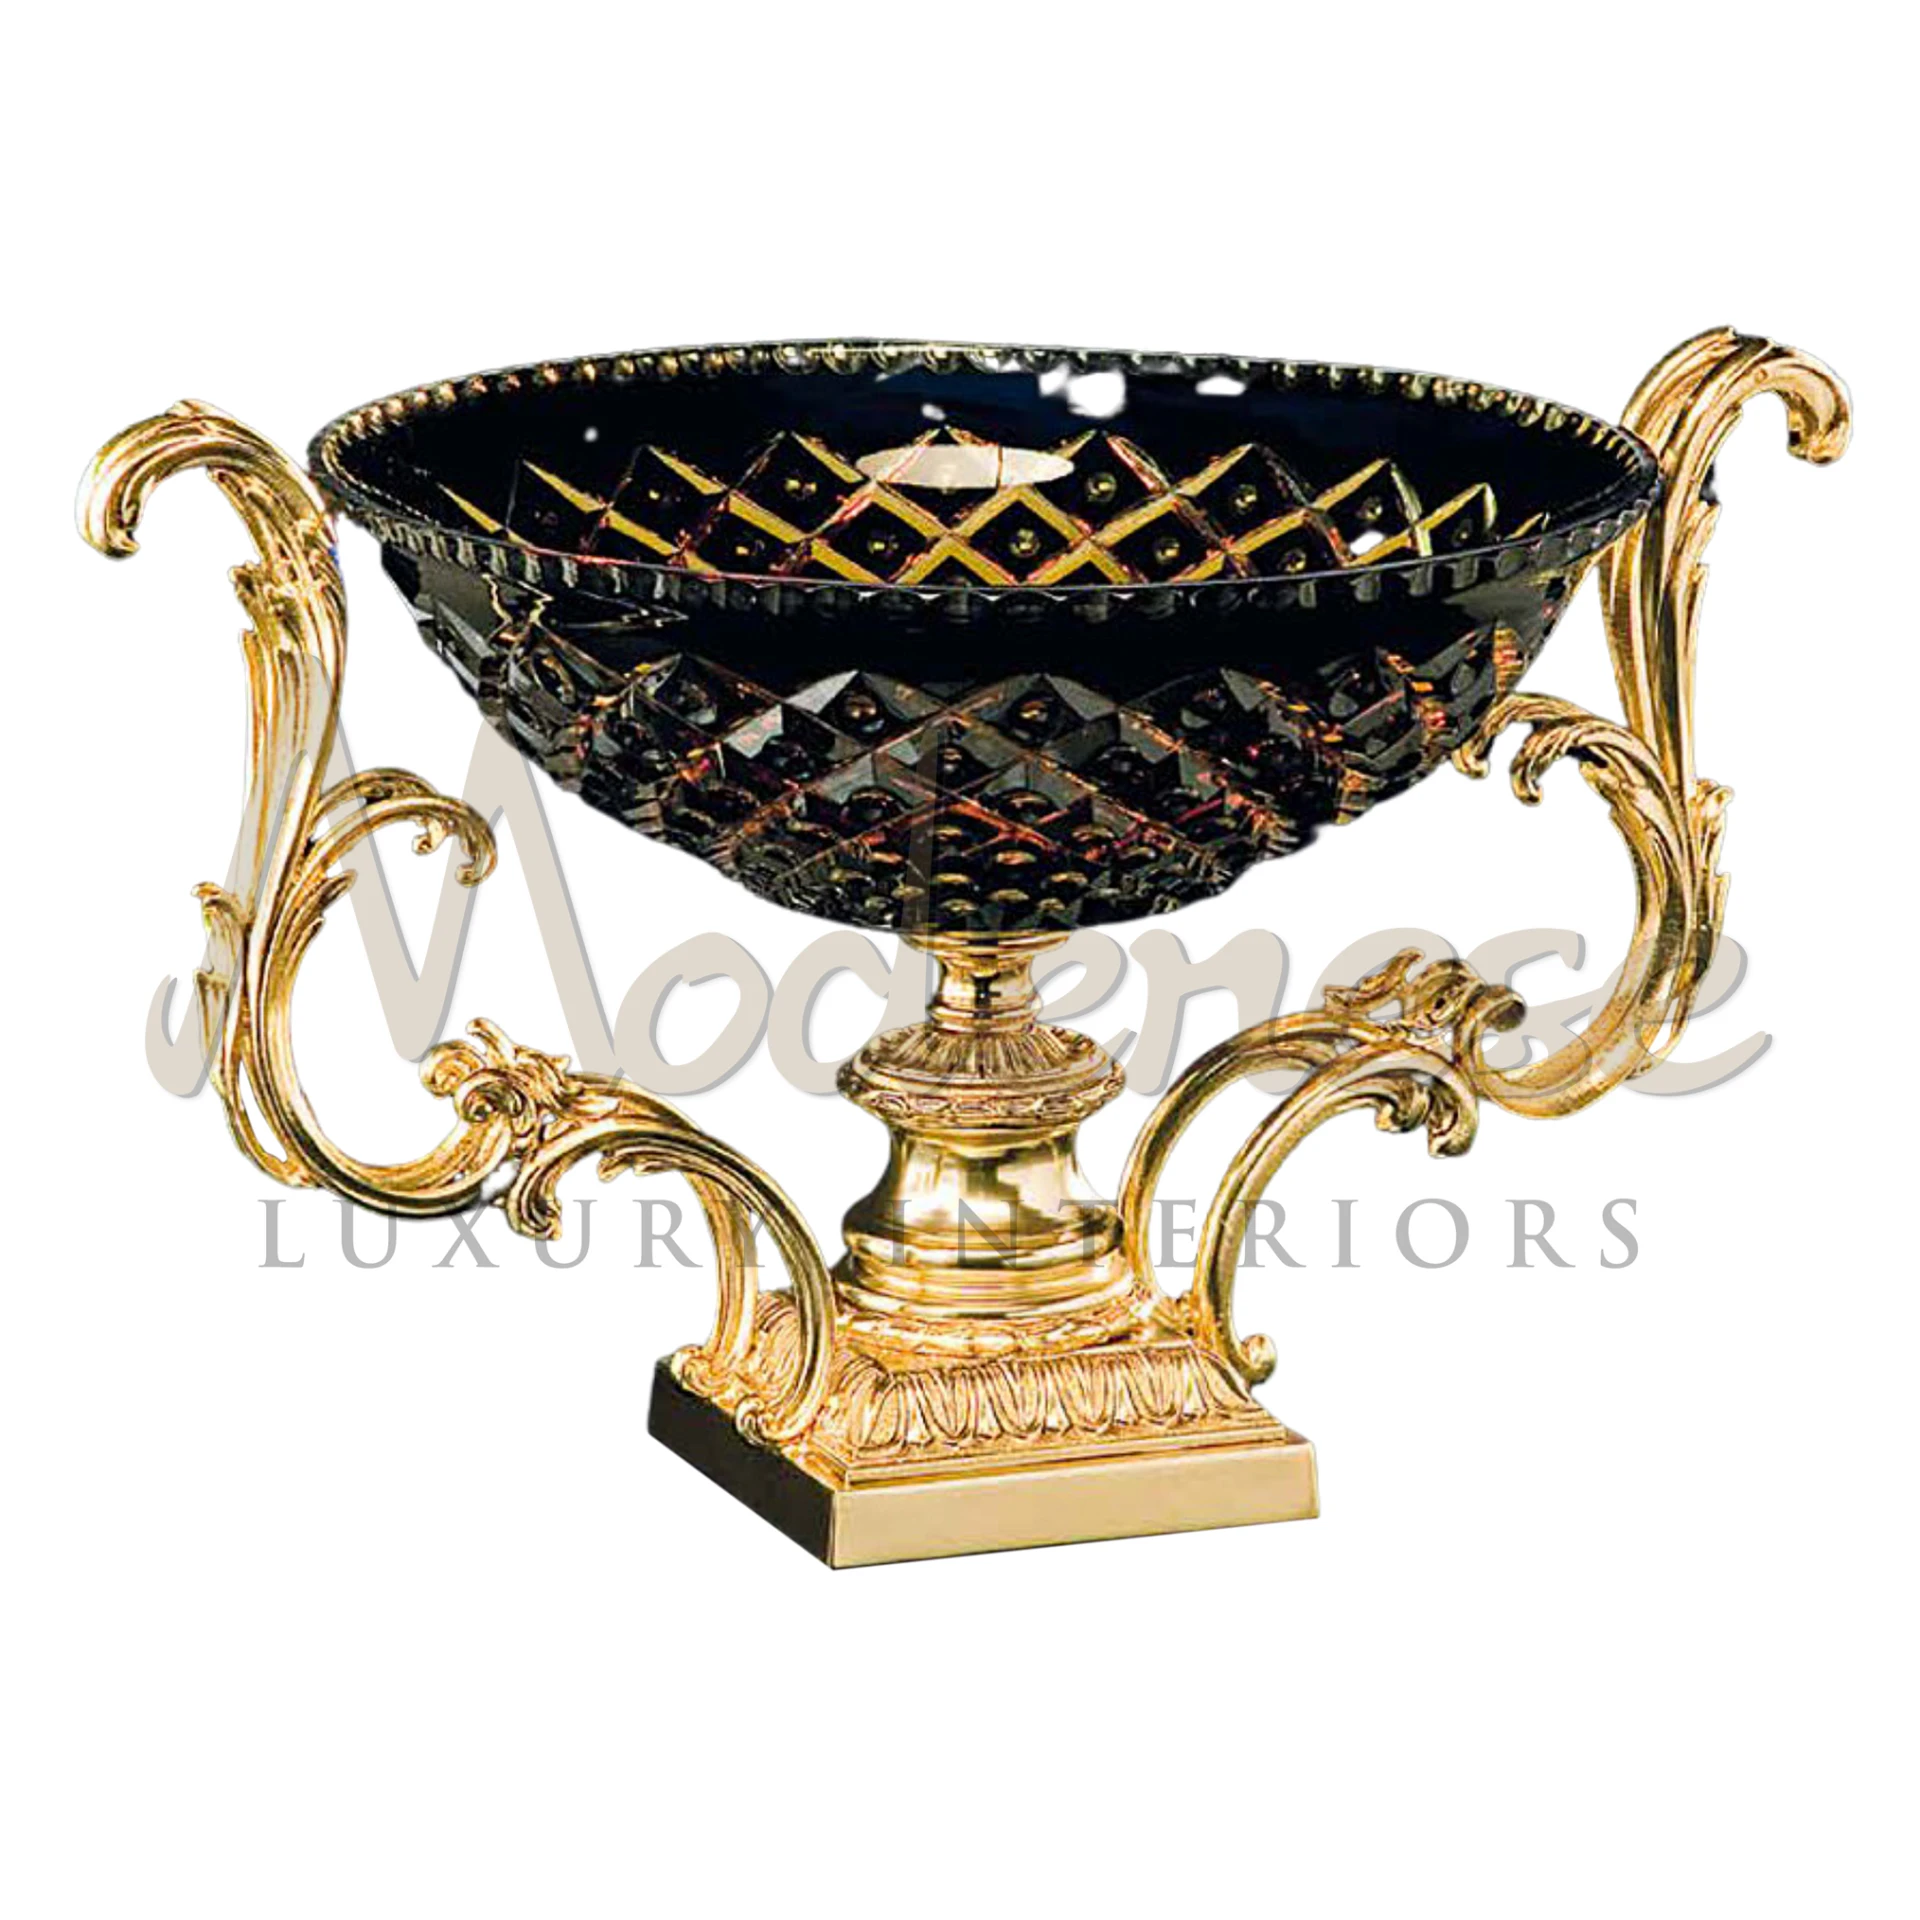 Elegant Stylish Black Two-Handled Bowl, with rich patterns and grand handles, ideal for a luxurious and classic interior design.